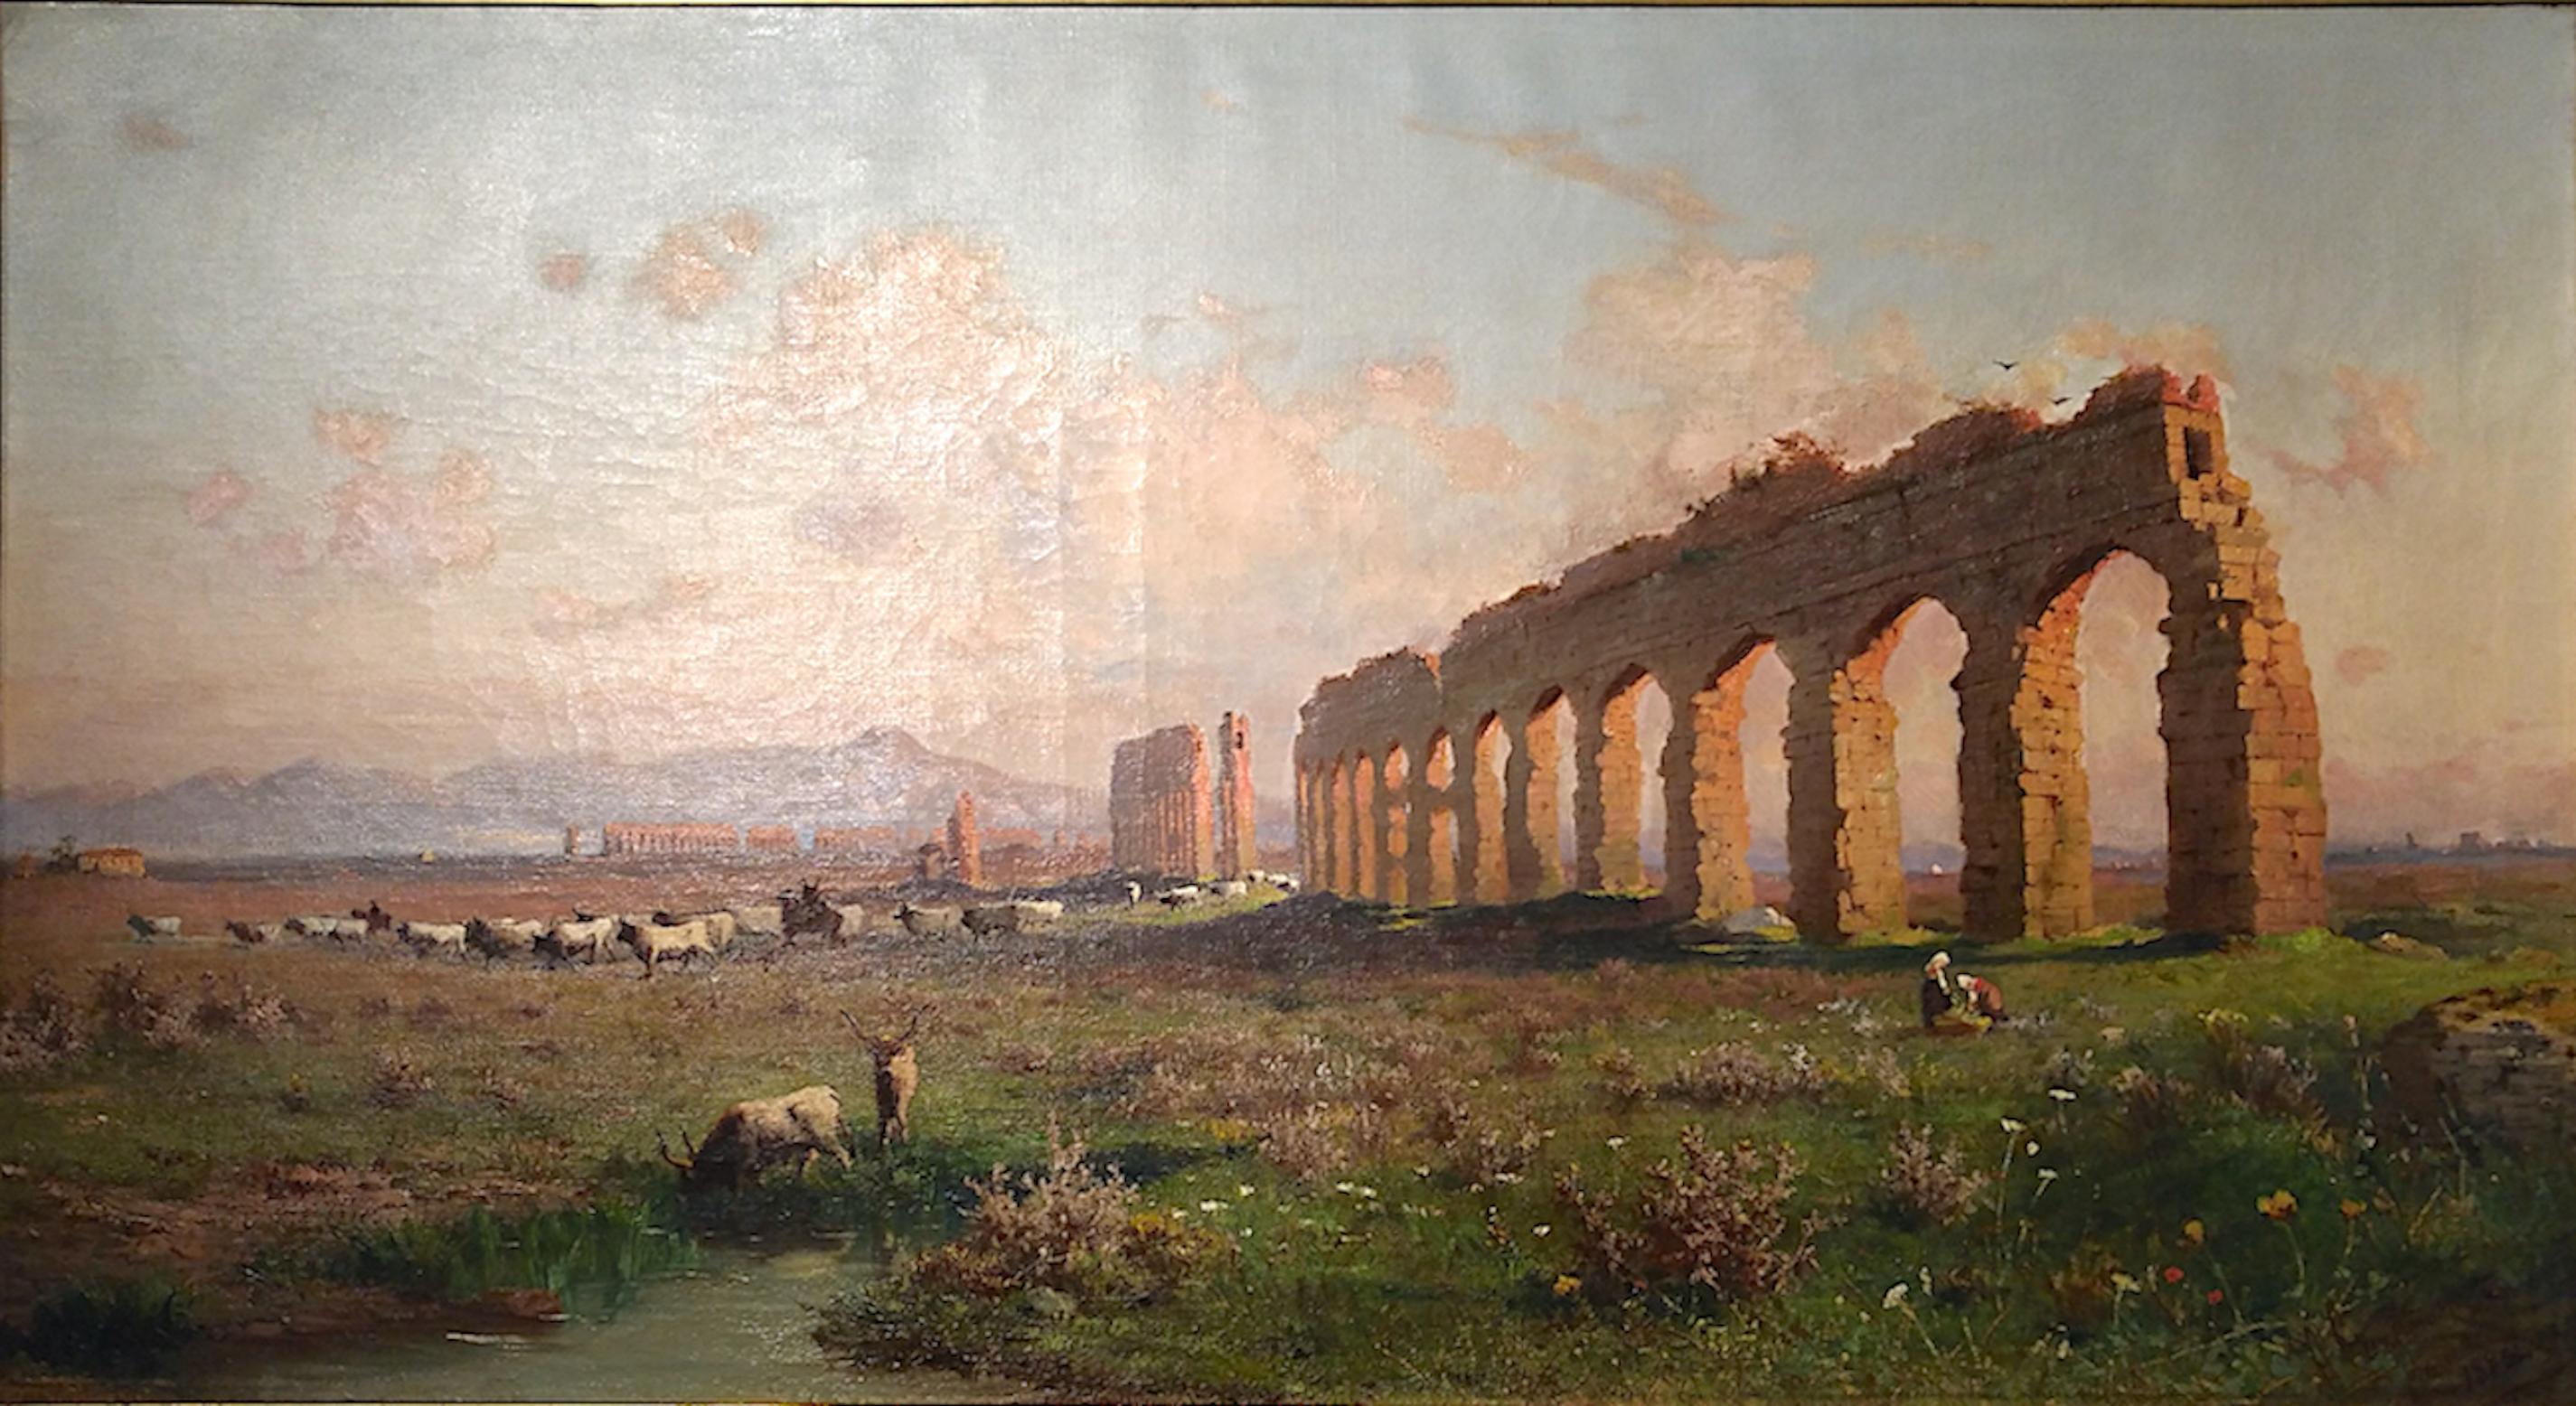 Henryk Cieszkowski (Plock 1835-Roma 1895)
The famous Roman aqueduct claudio along the Ancient Via Appia
Signed and dated lower right: H Cieszkowski Roma 1884

Henryk Cieszkowski (born 1835 in Plock, died 1895 in Rome) was a Polish painter.